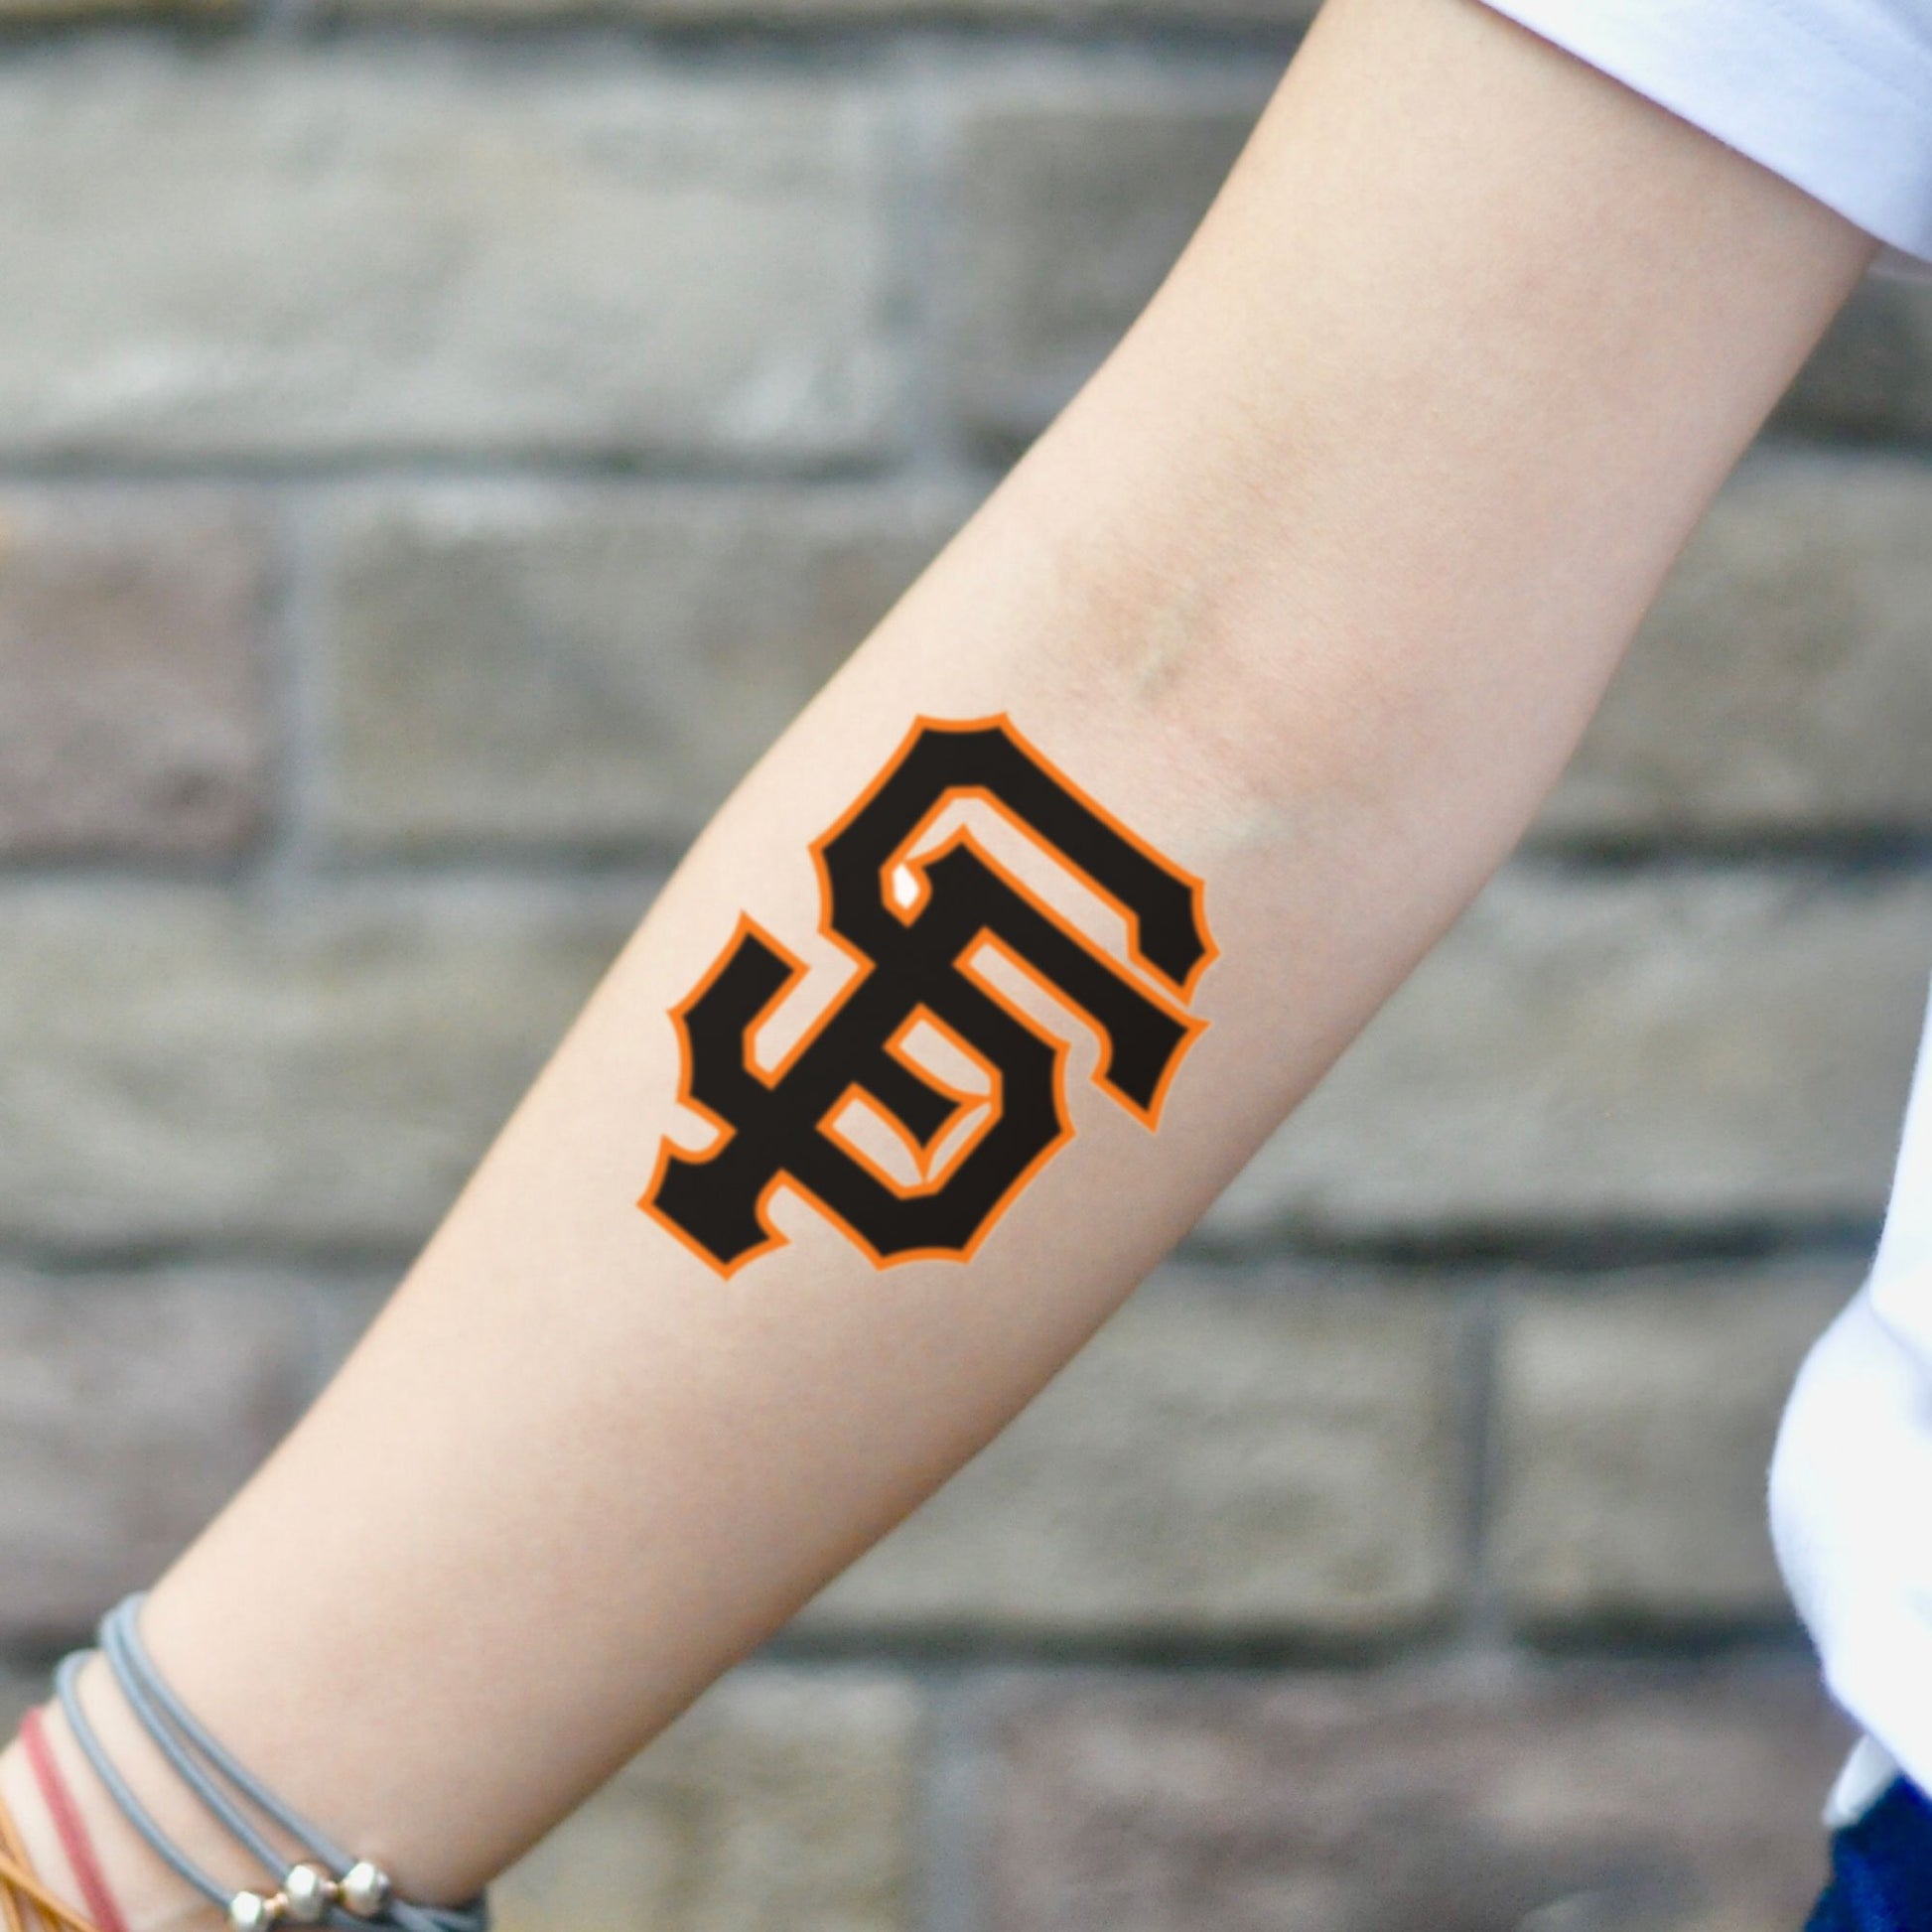 fake small sf giants color temporary tattoo sticker design idea on inner arm